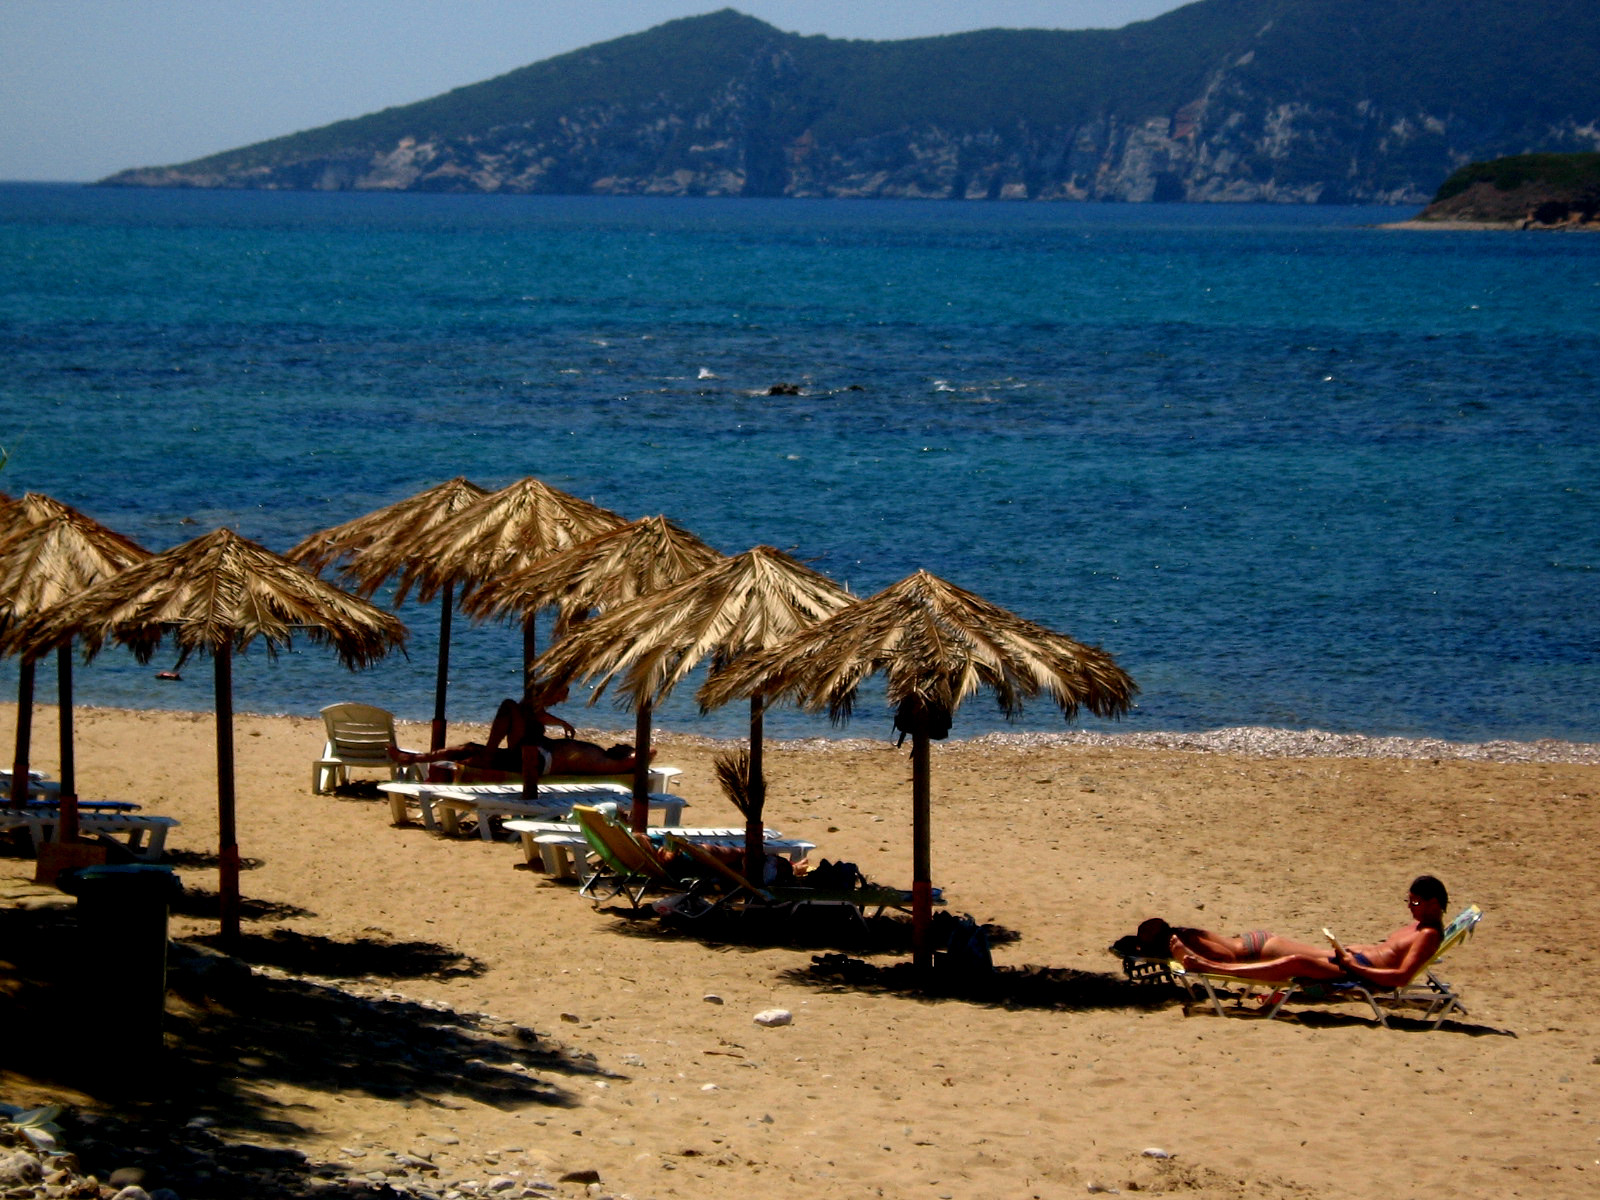 Methoni beach holidays, in season there is a good selection of traditional Greek tavernas and restaurants - Methoni Greece 